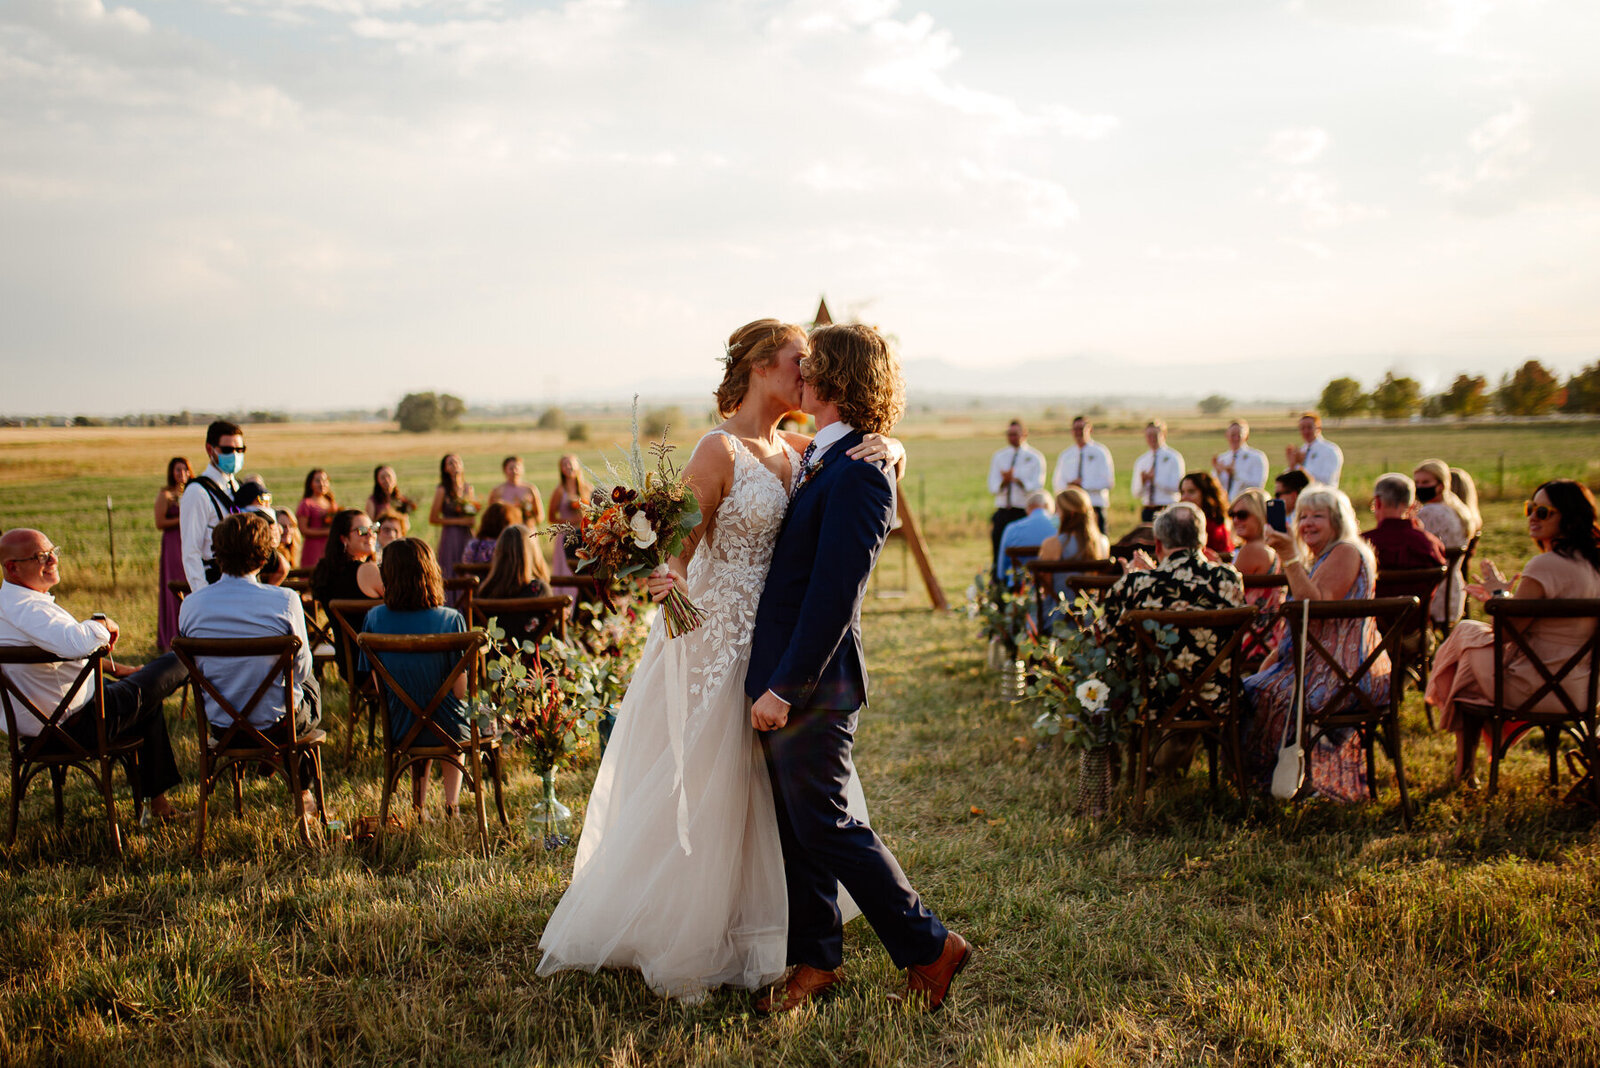 Destination wedding at a farm in a field, first kiss by bride and groom.